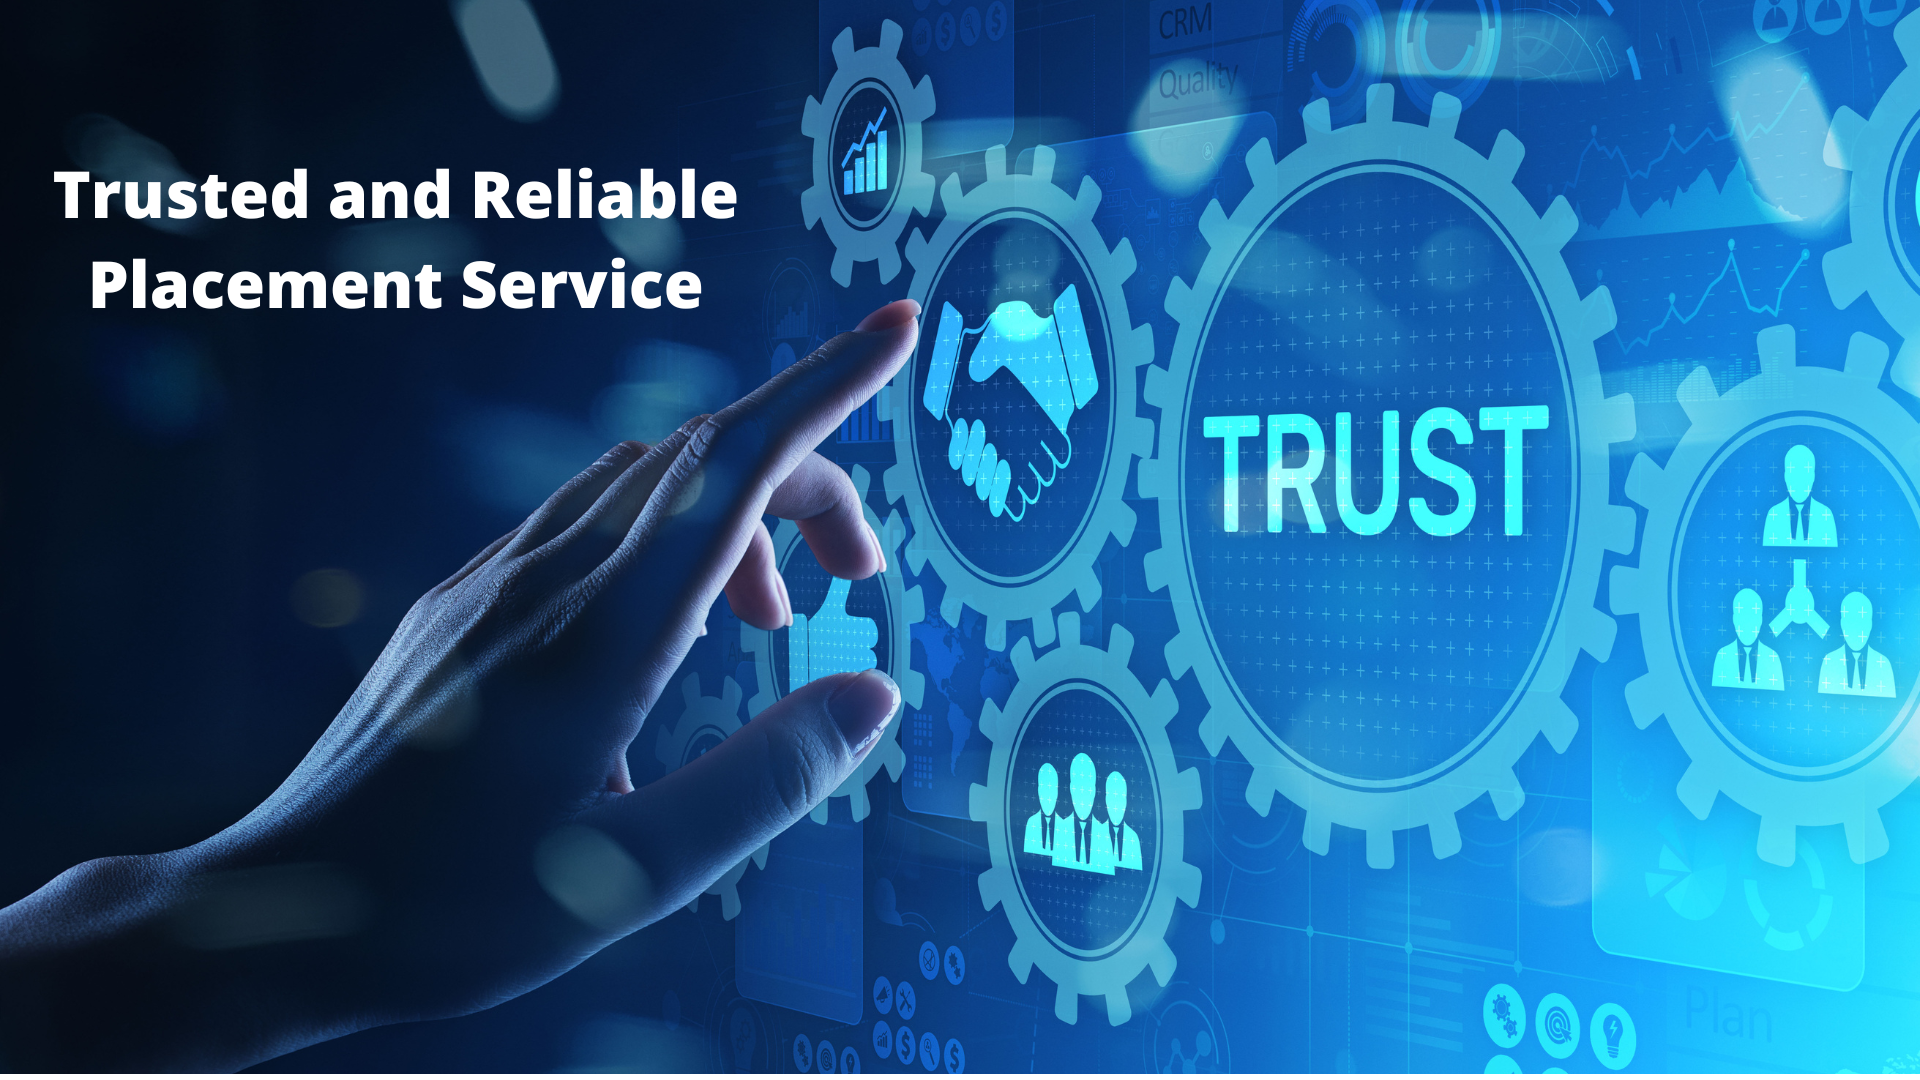 Trusted and Reliable Placement Service